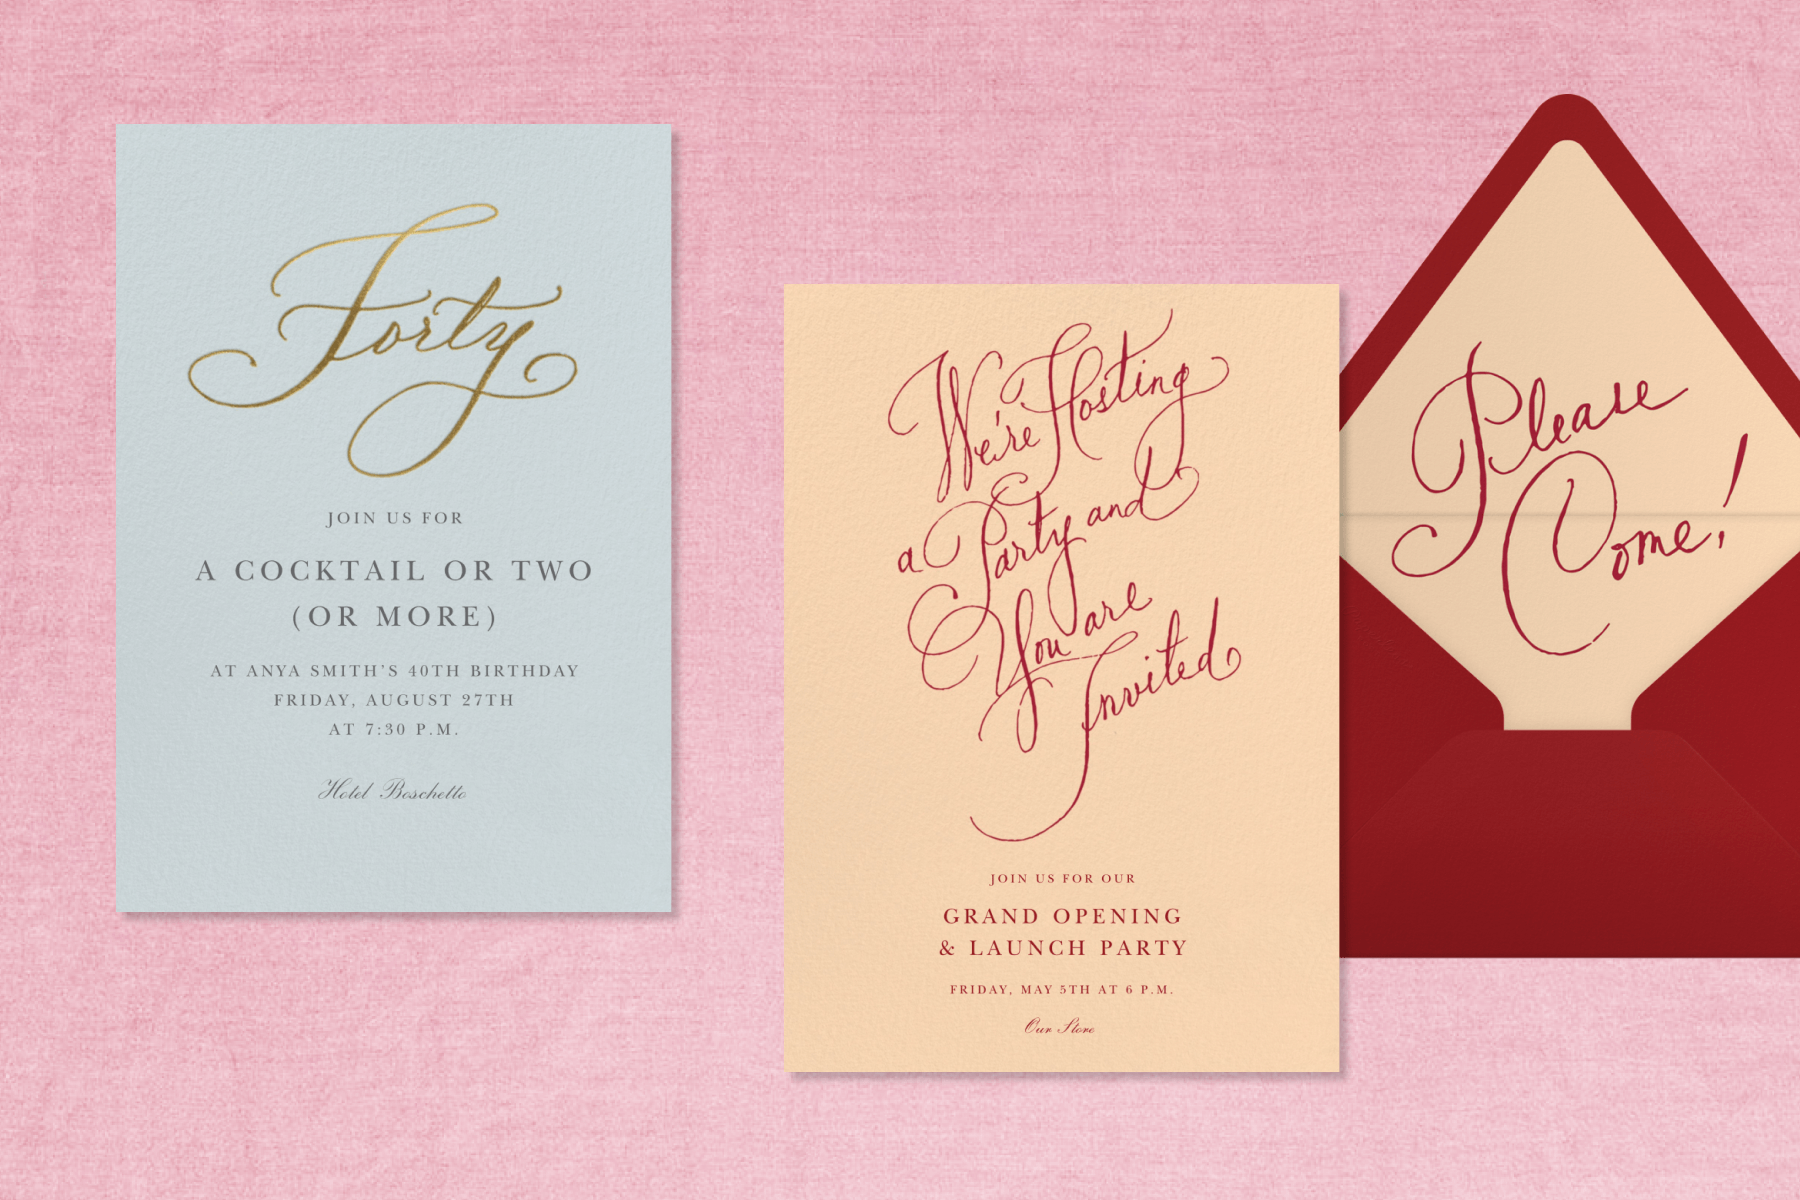 Two Stephanie Fishwick invitations with eclectic designs.